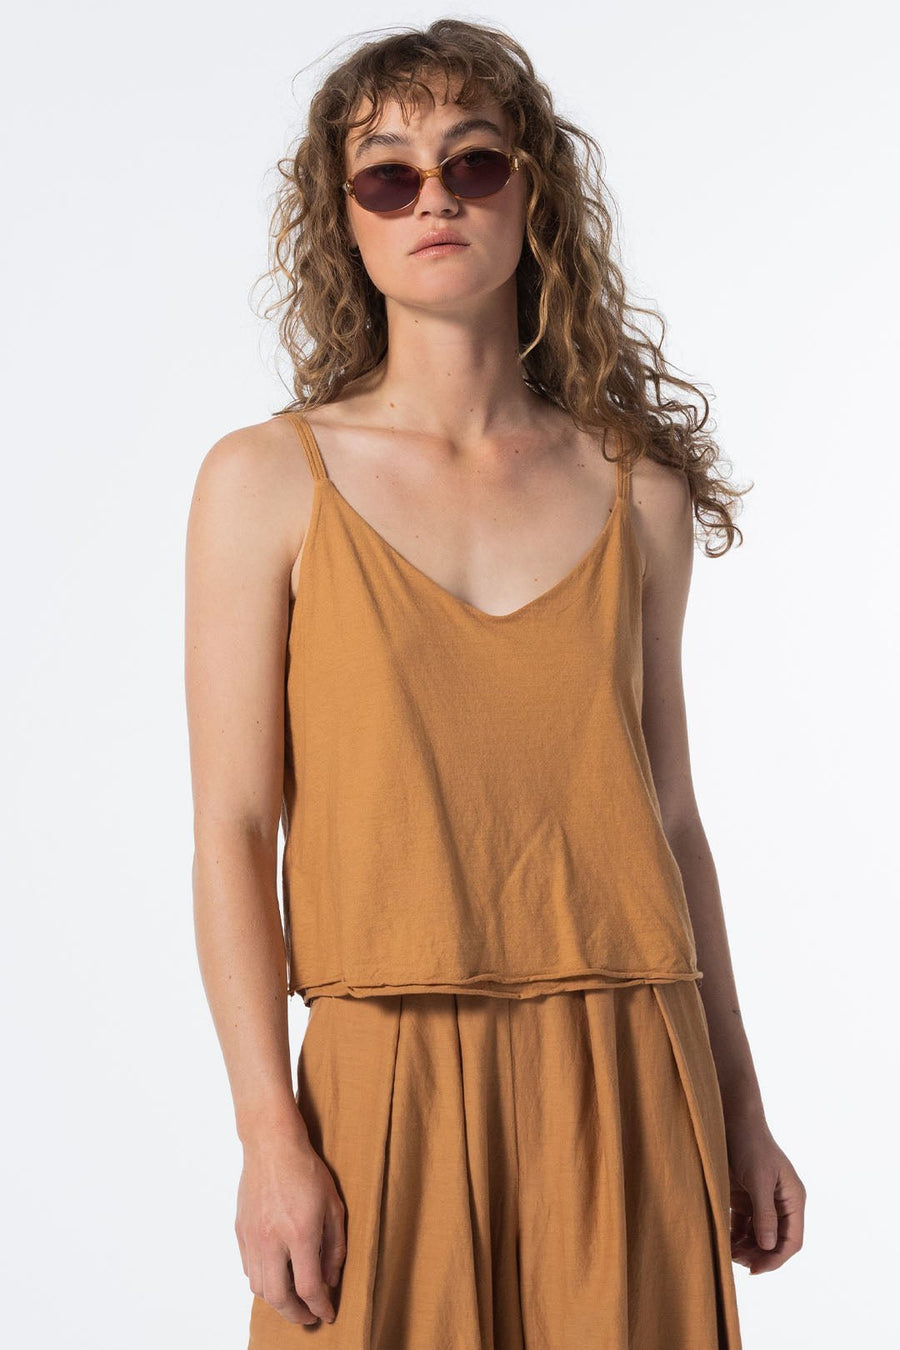 P.C.H. KNIT CAMI, AMBER - Burning Torch Online Boutique